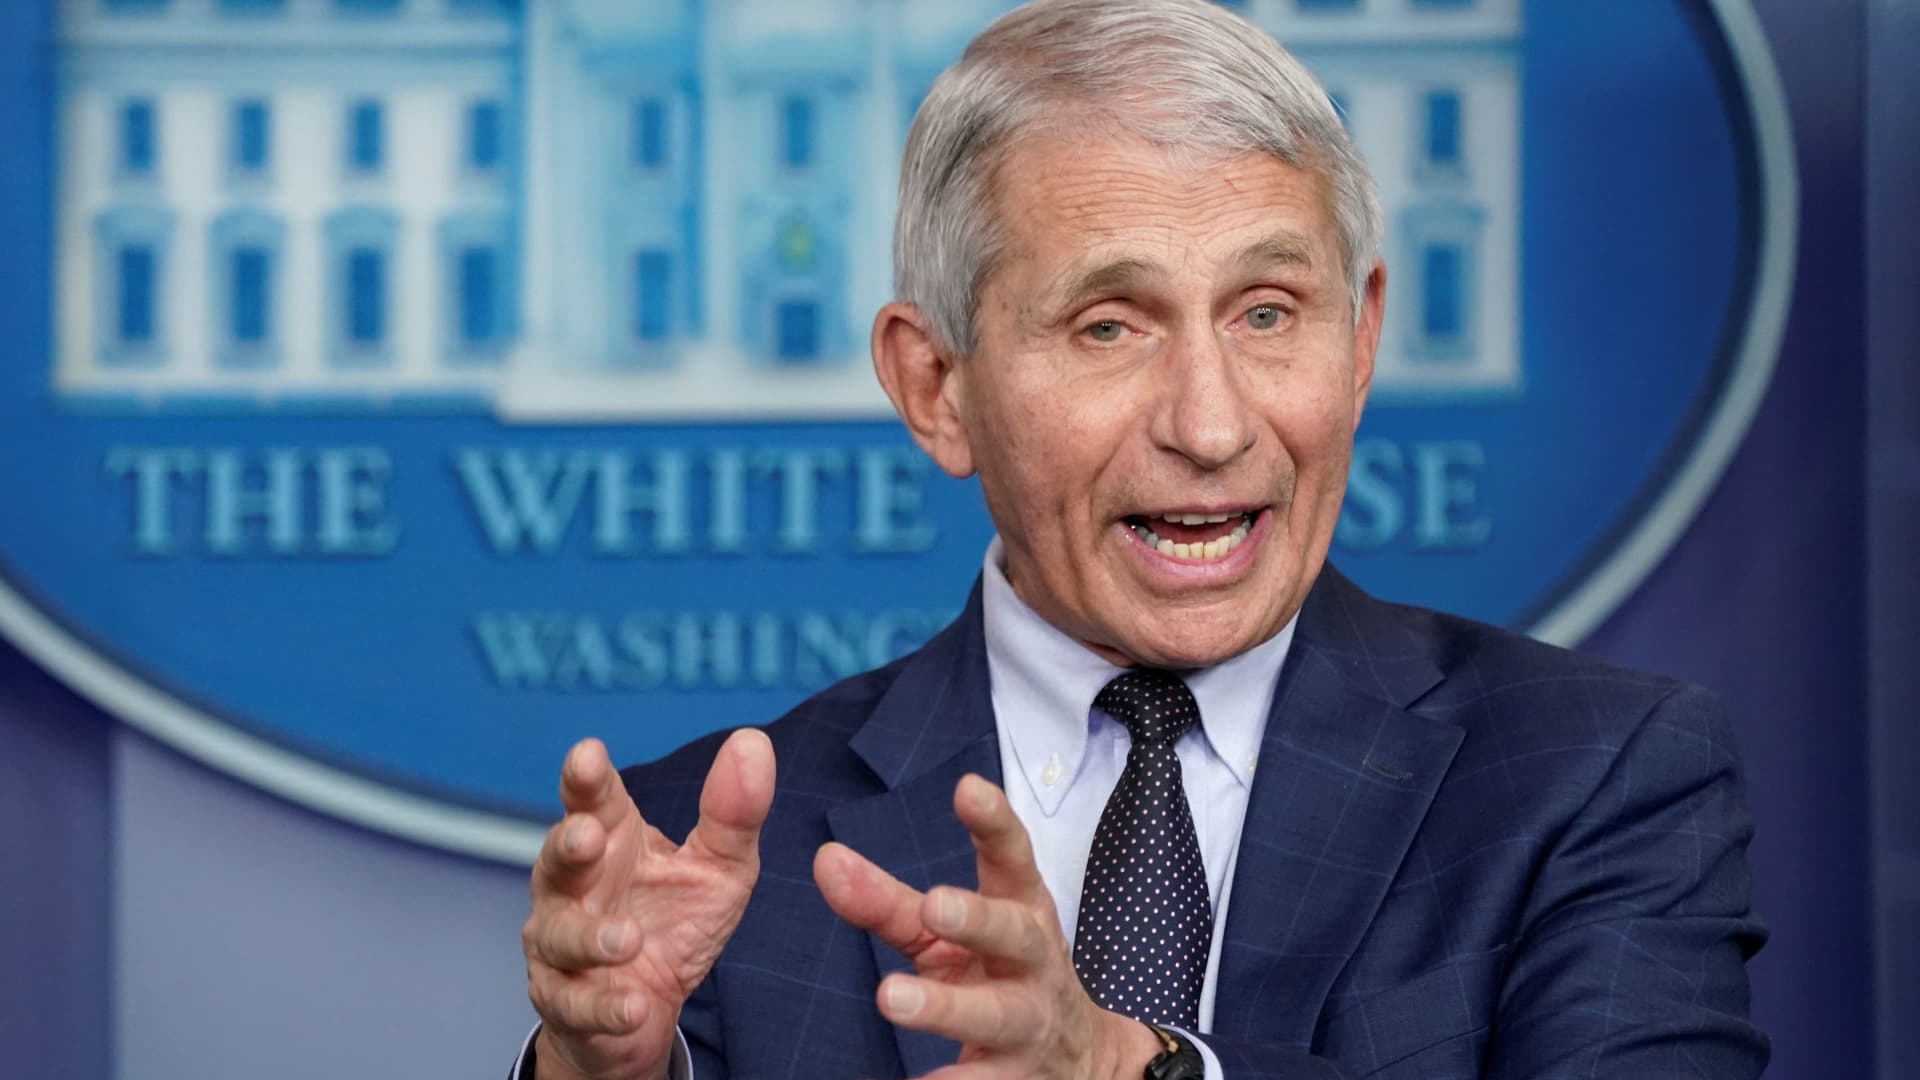 Dr. Anthony Fauci speaks about the Omicron coronavirus variant during a press briefing at the White House in Washington, December 1, 2021.